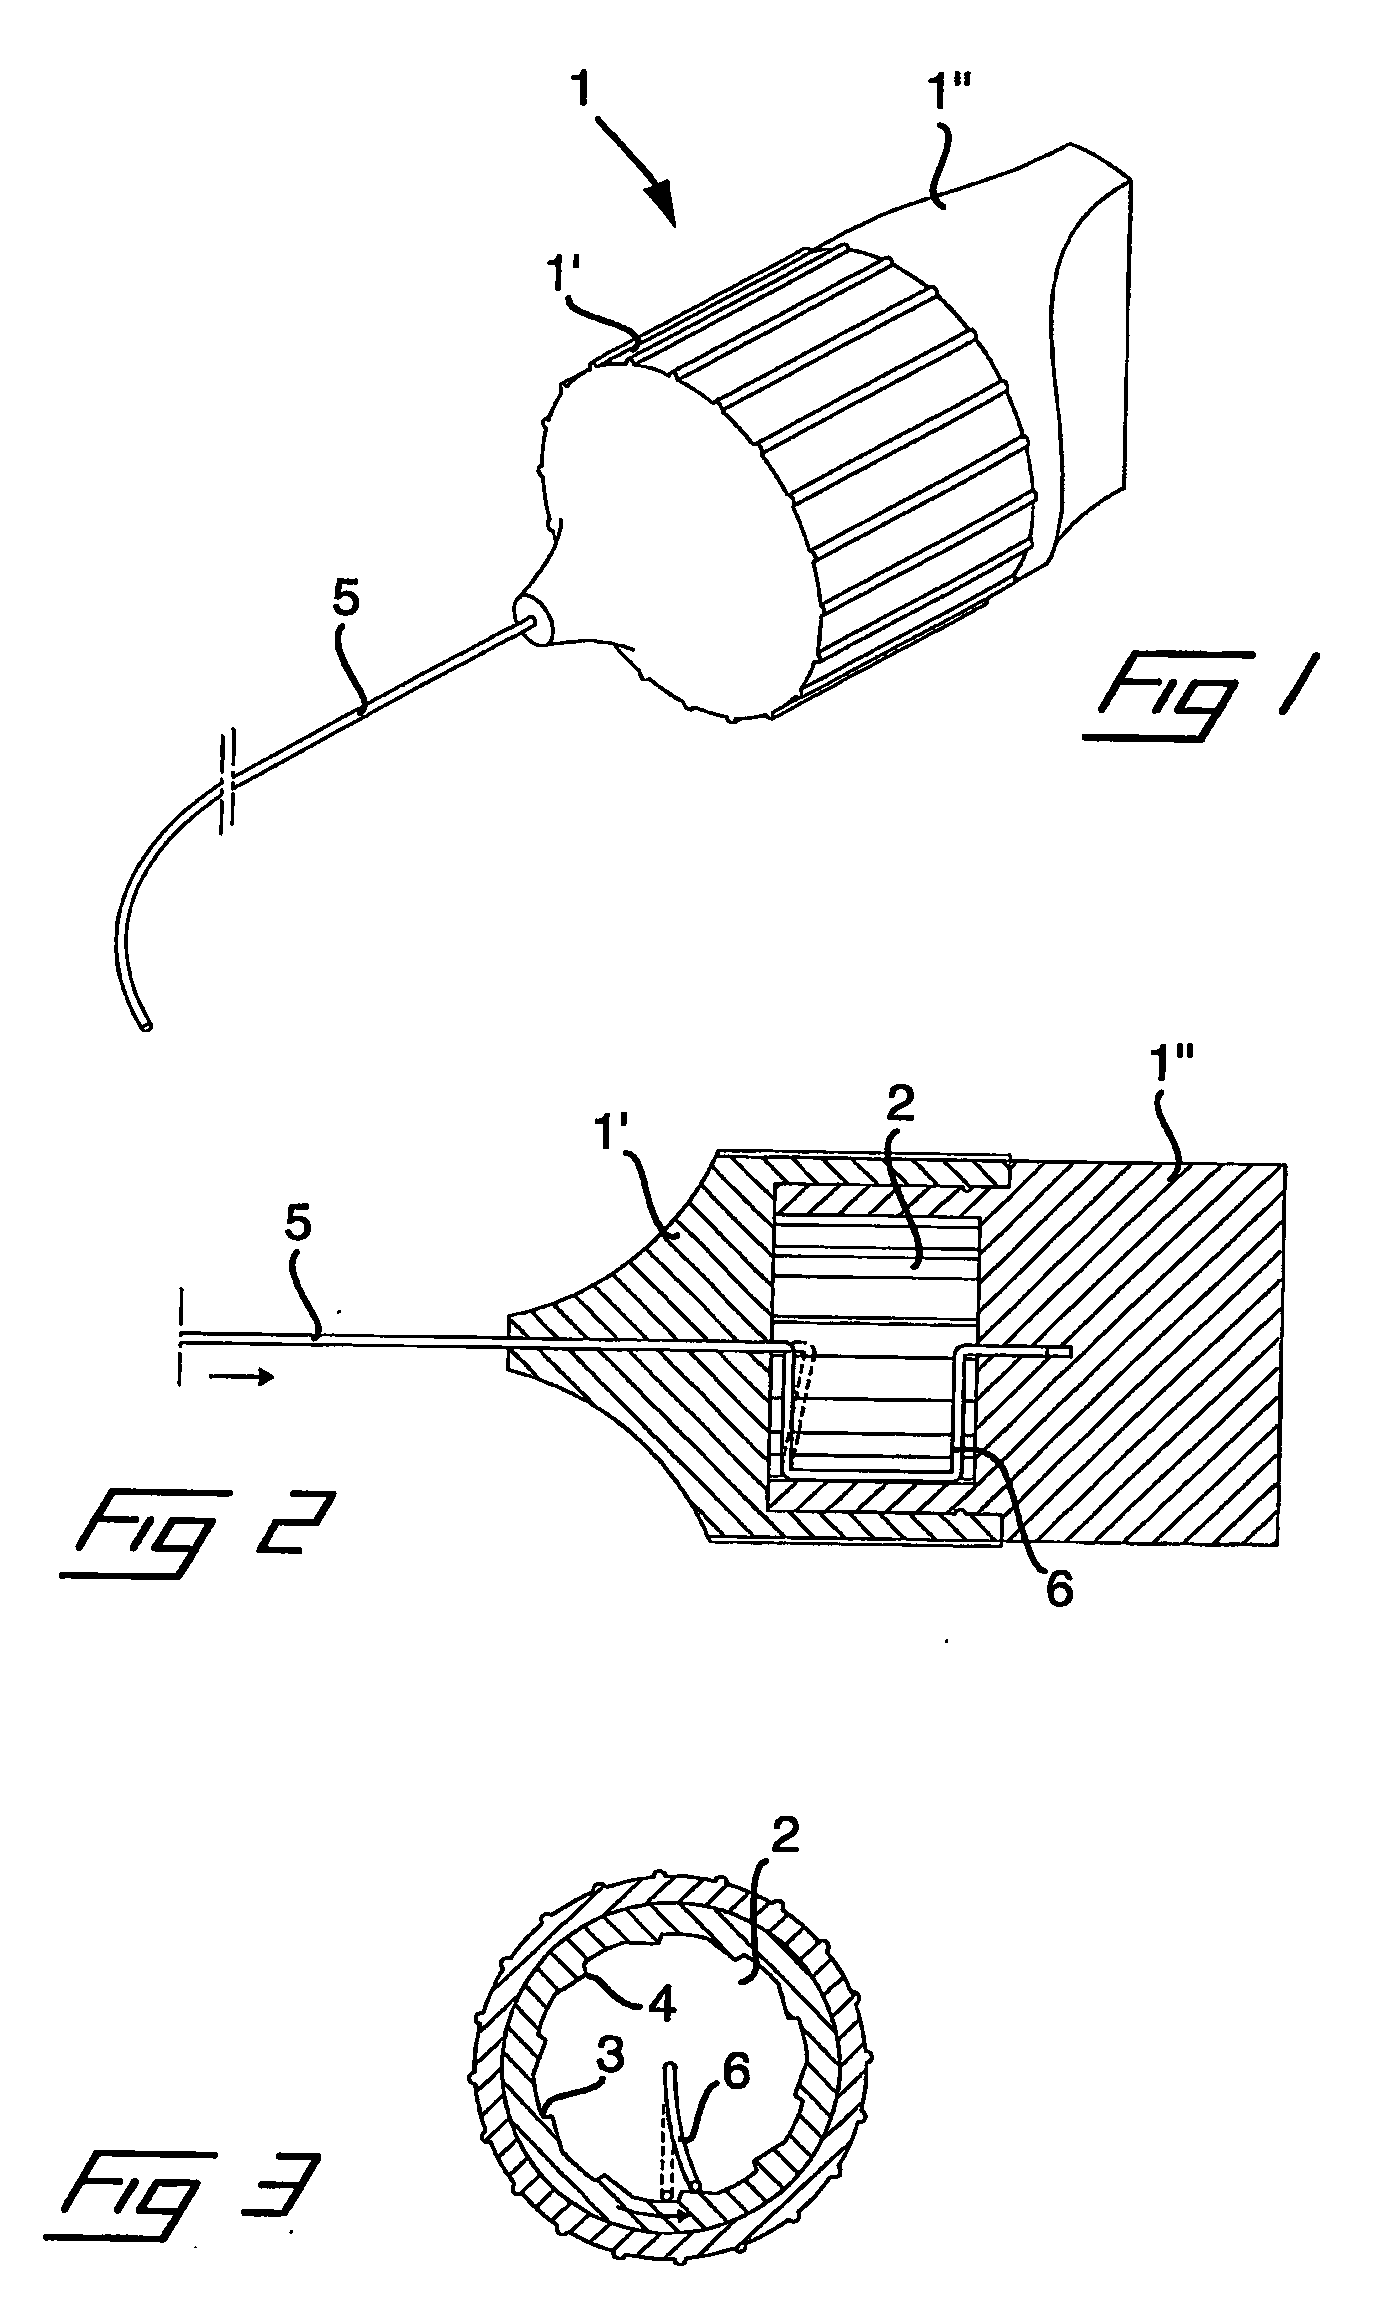 Tool and a Method for Attaching a Cardiac Stimulator Lead at a Desired Position Inside a Heart